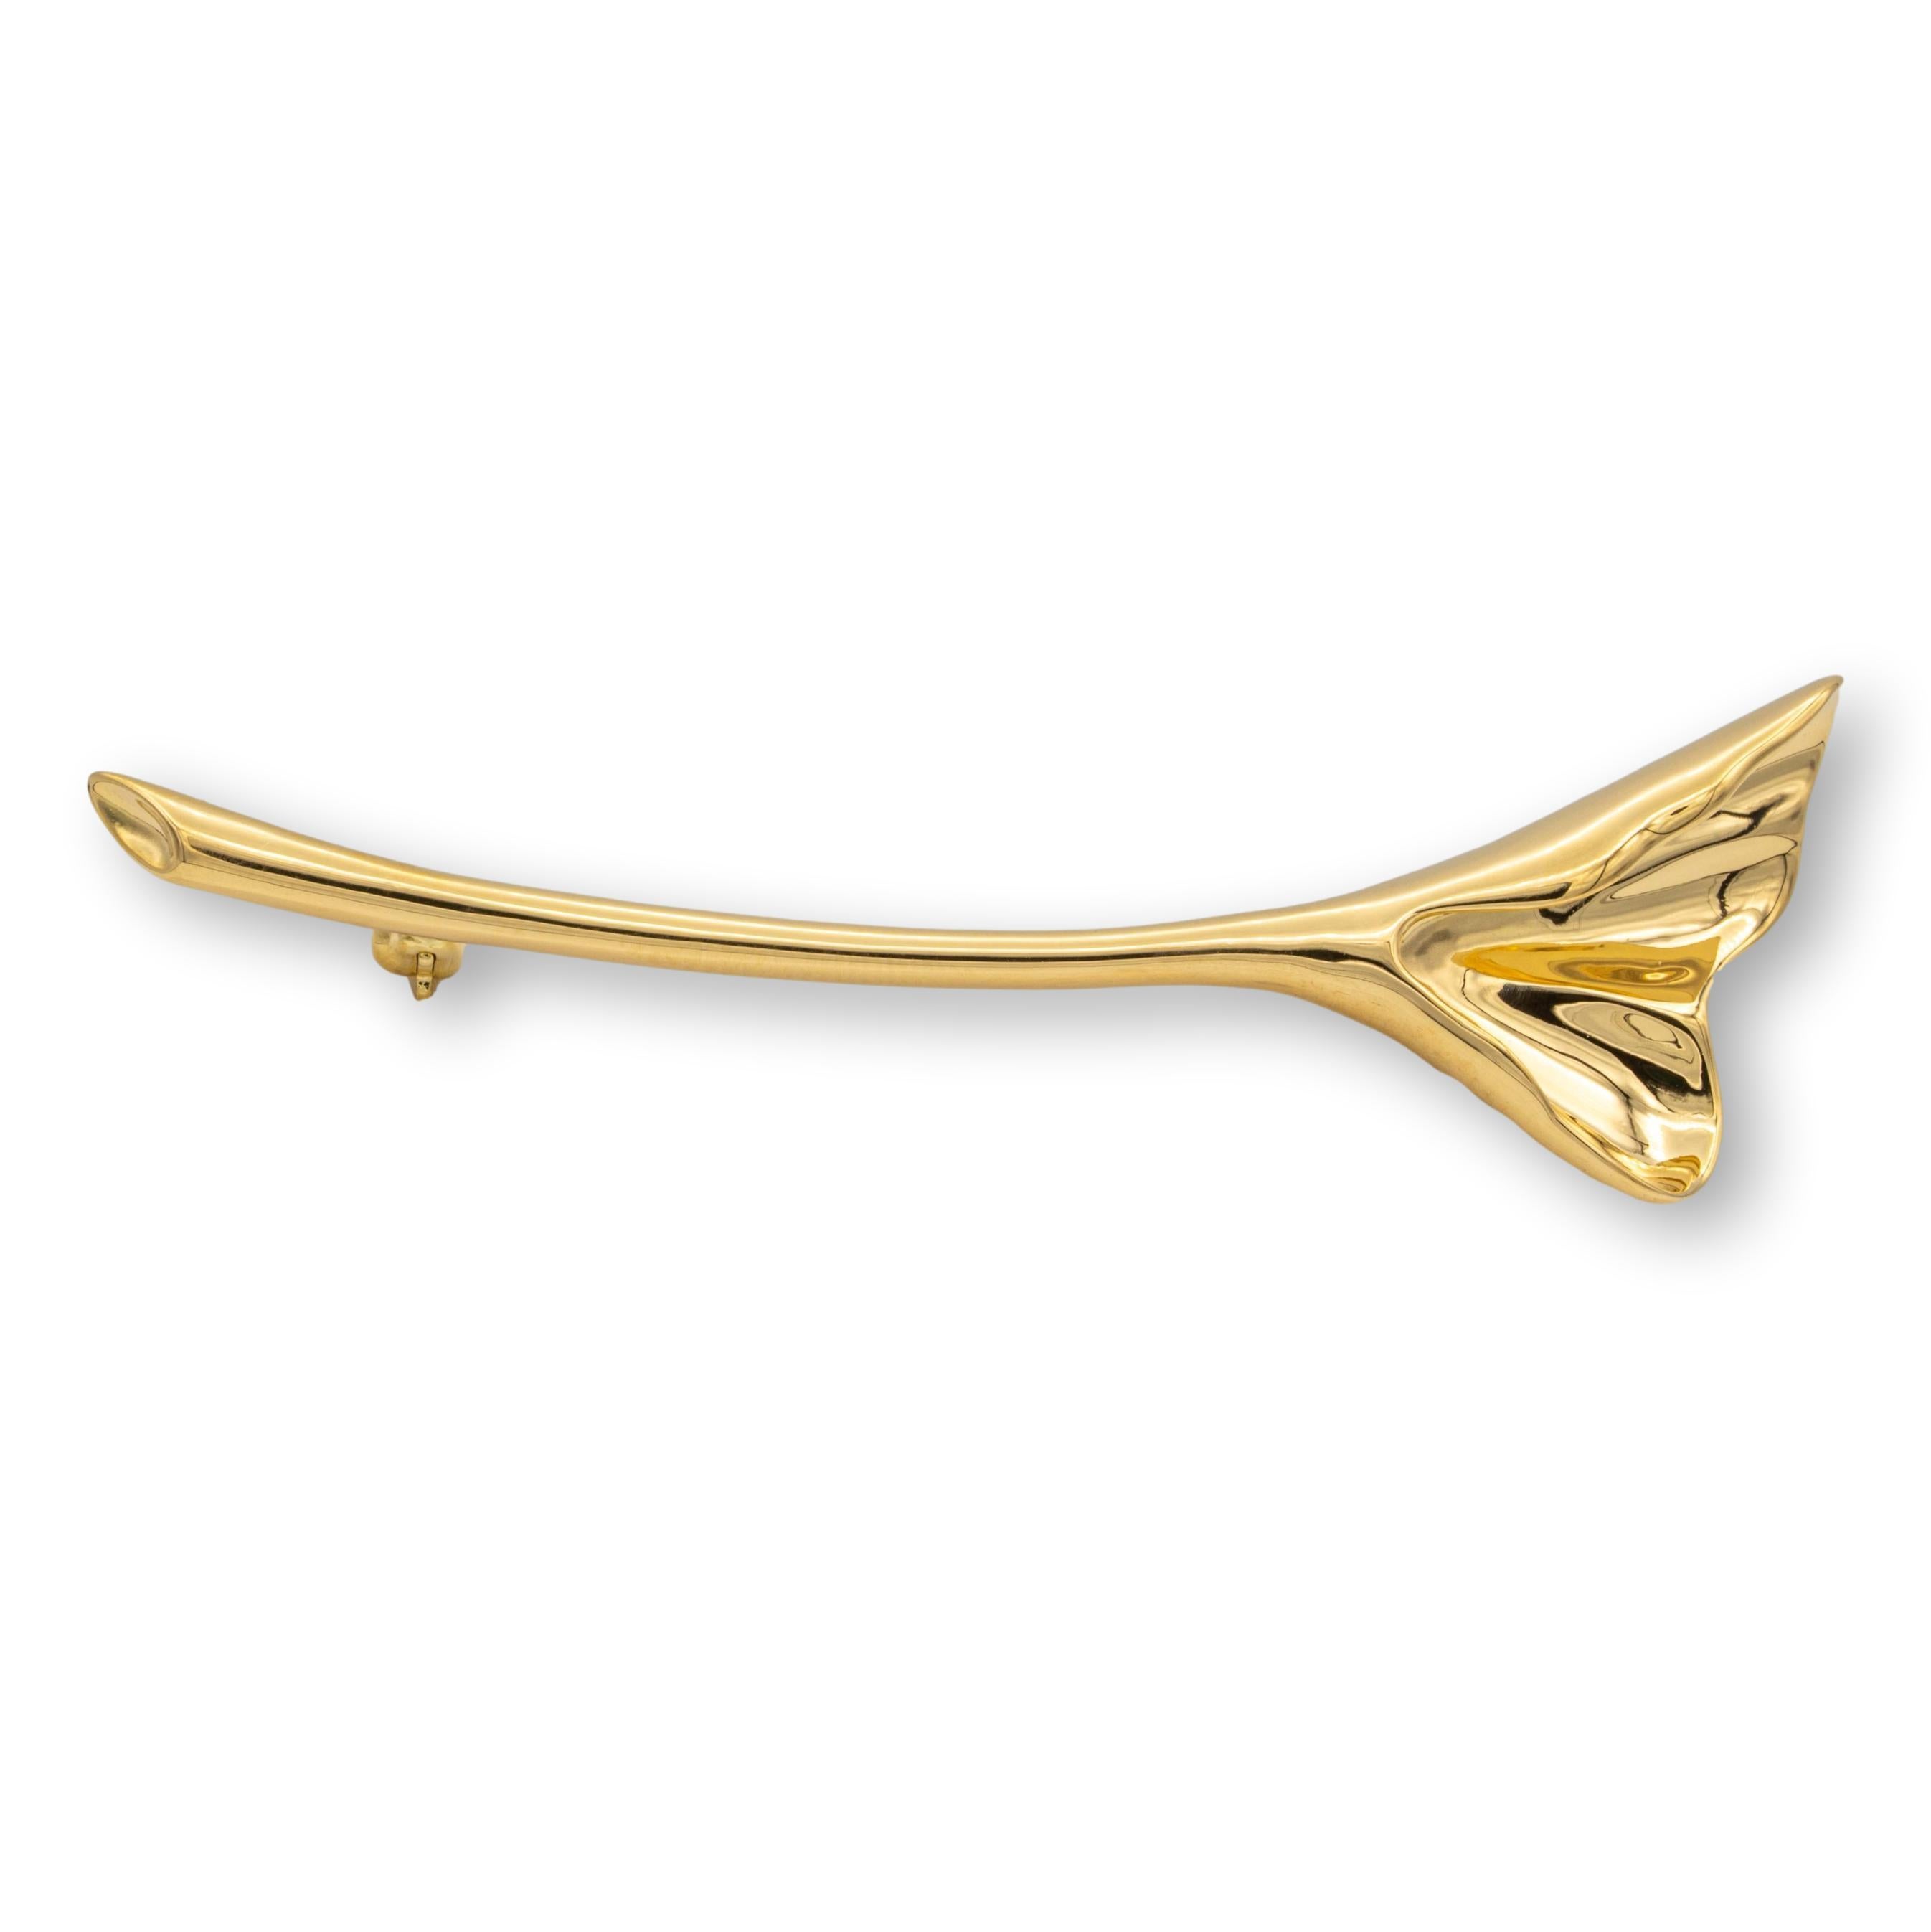 Vintage Tiffany & Co. Cala Lily flower brooch finely crafted in 18 karat yellow gold . This brooch has a stick pin closure and was manufactured in the year 1960.

Brand: Tiffany & Co. 
Hallmarks: 750 © Tiffany & Co.
Weight: 8.8 grams
Measurements: